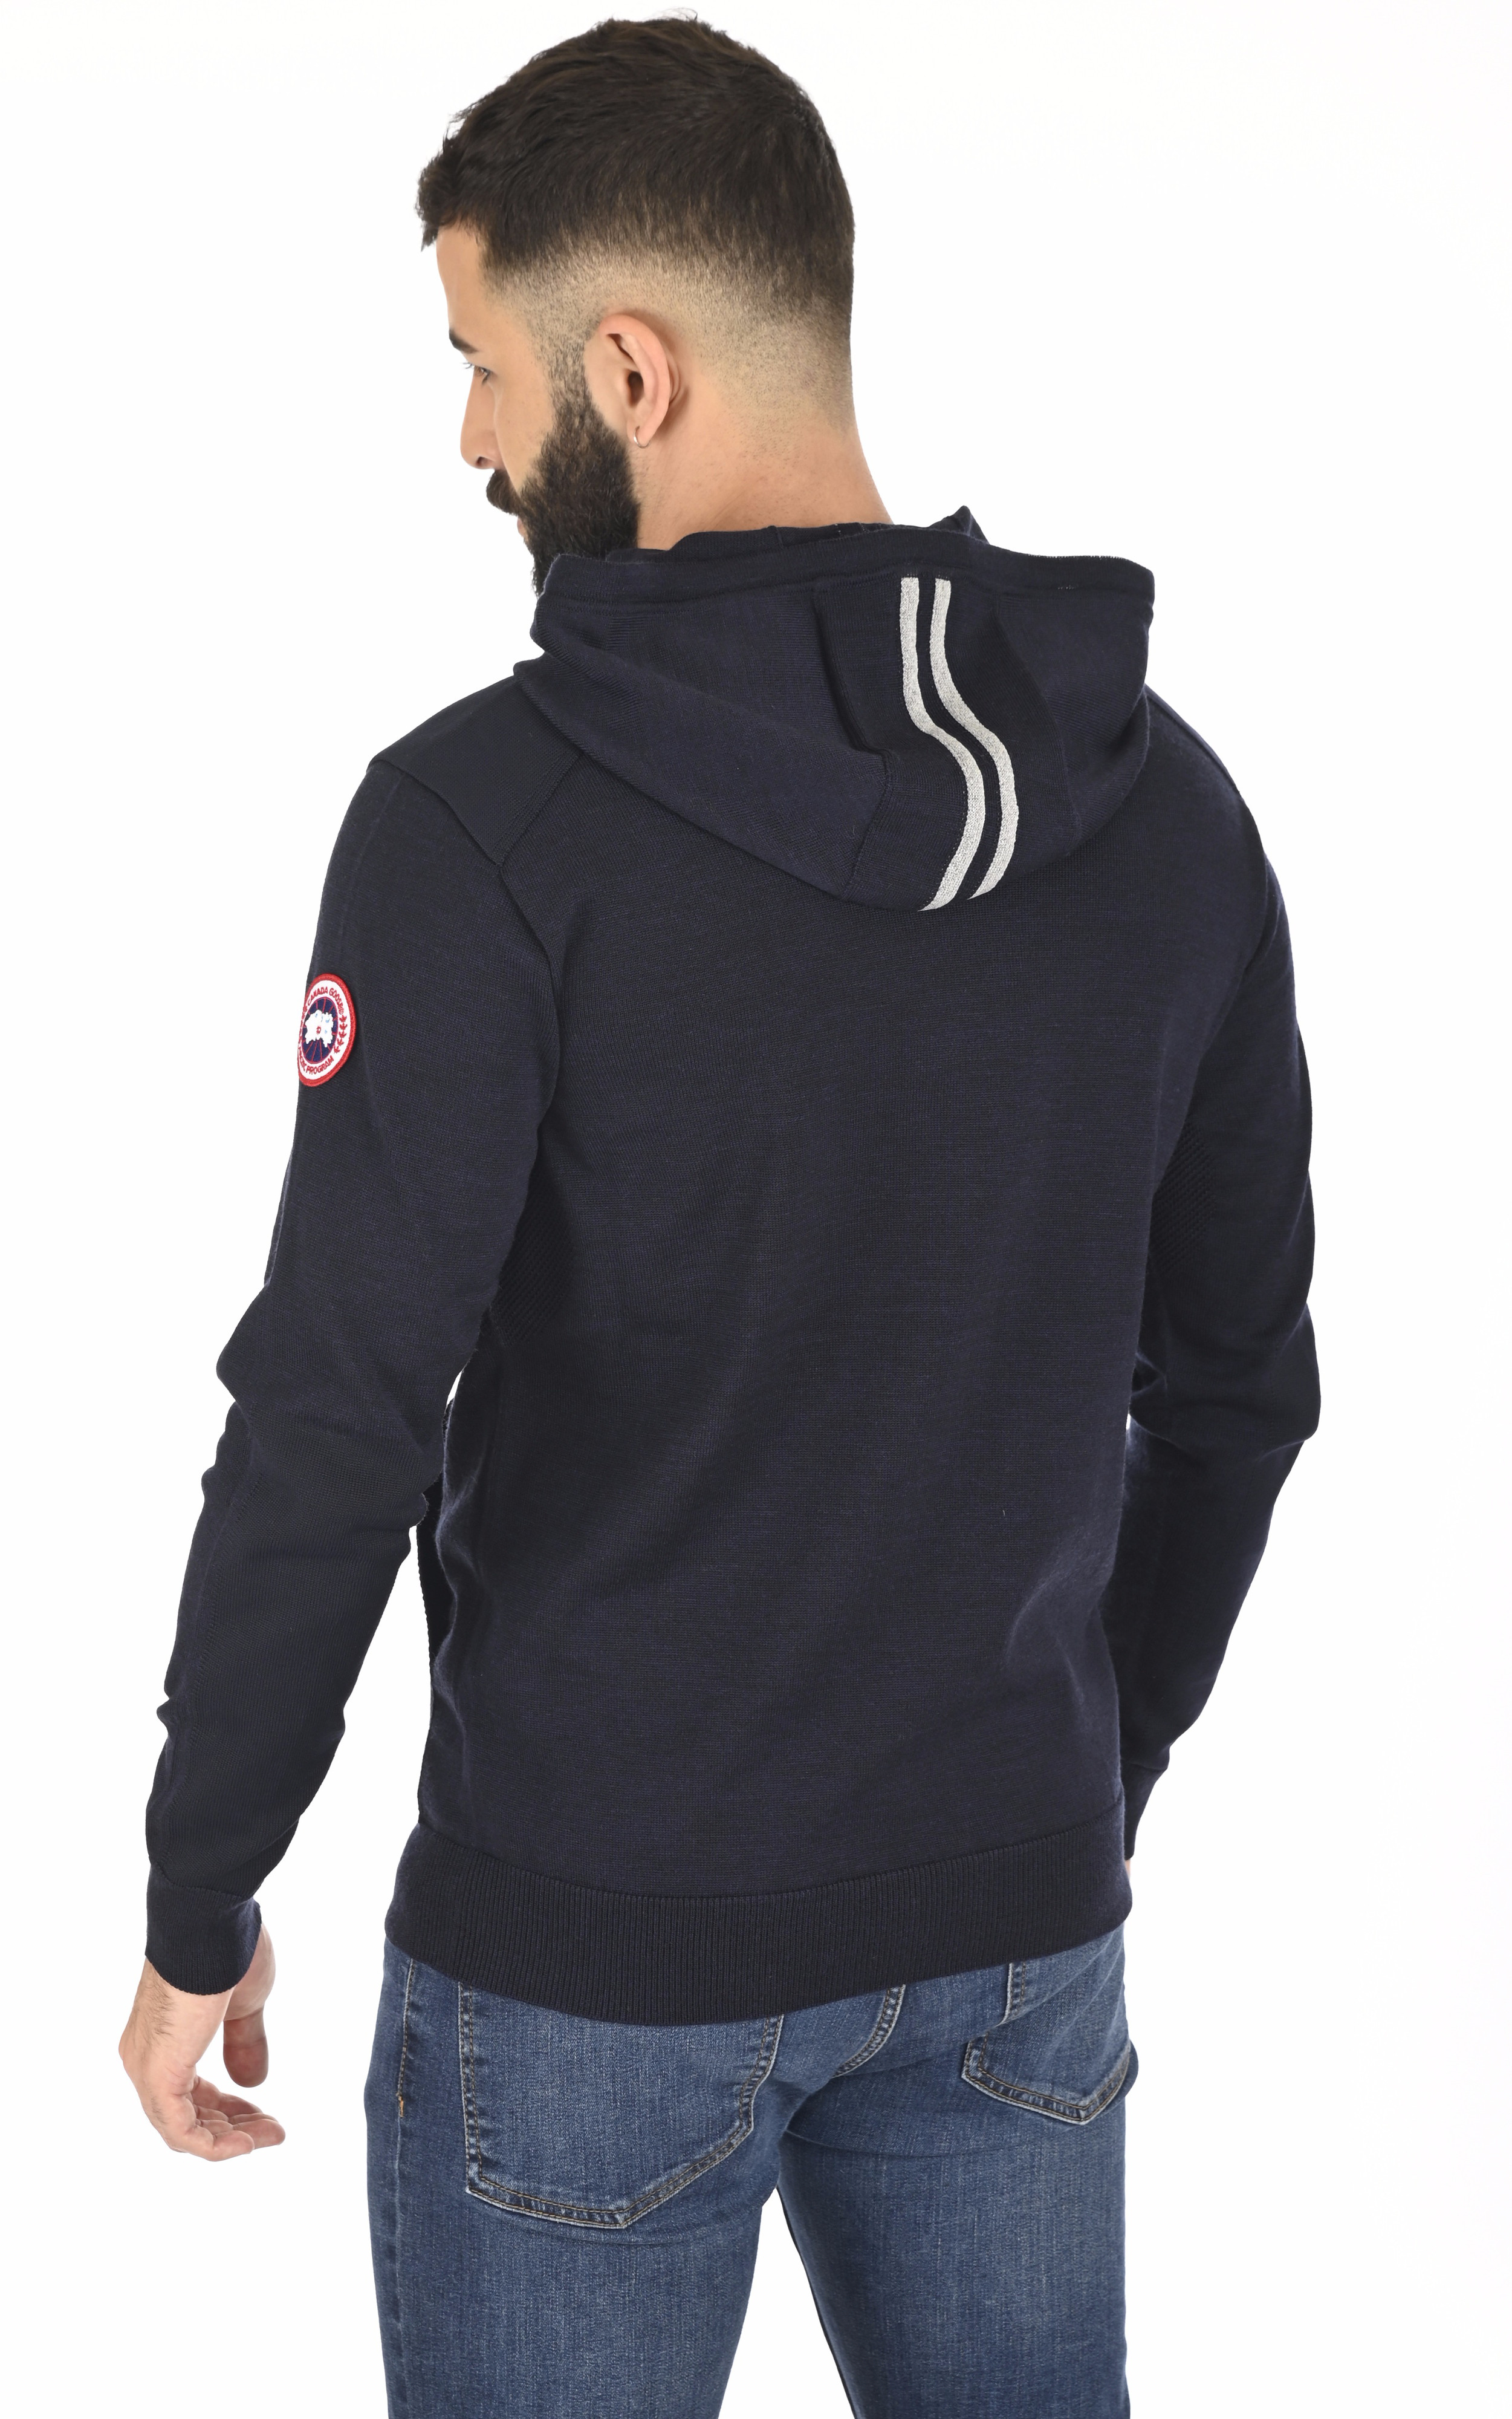 Pull à capuche Amherst navy Canada Goose